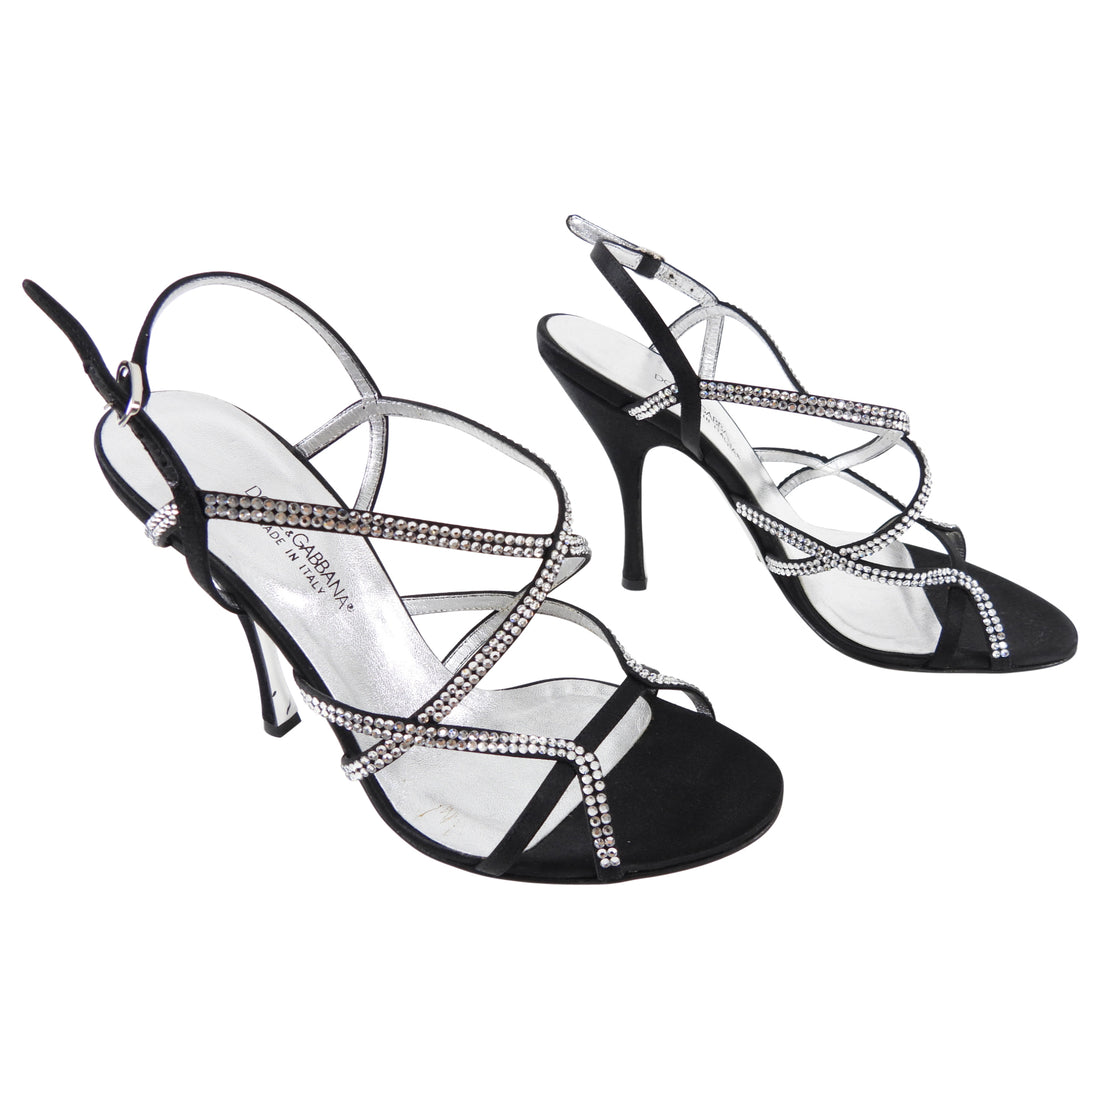 Dolce & Gabbana Black Satin and Crystal Strappy Sandals - 37 / 7